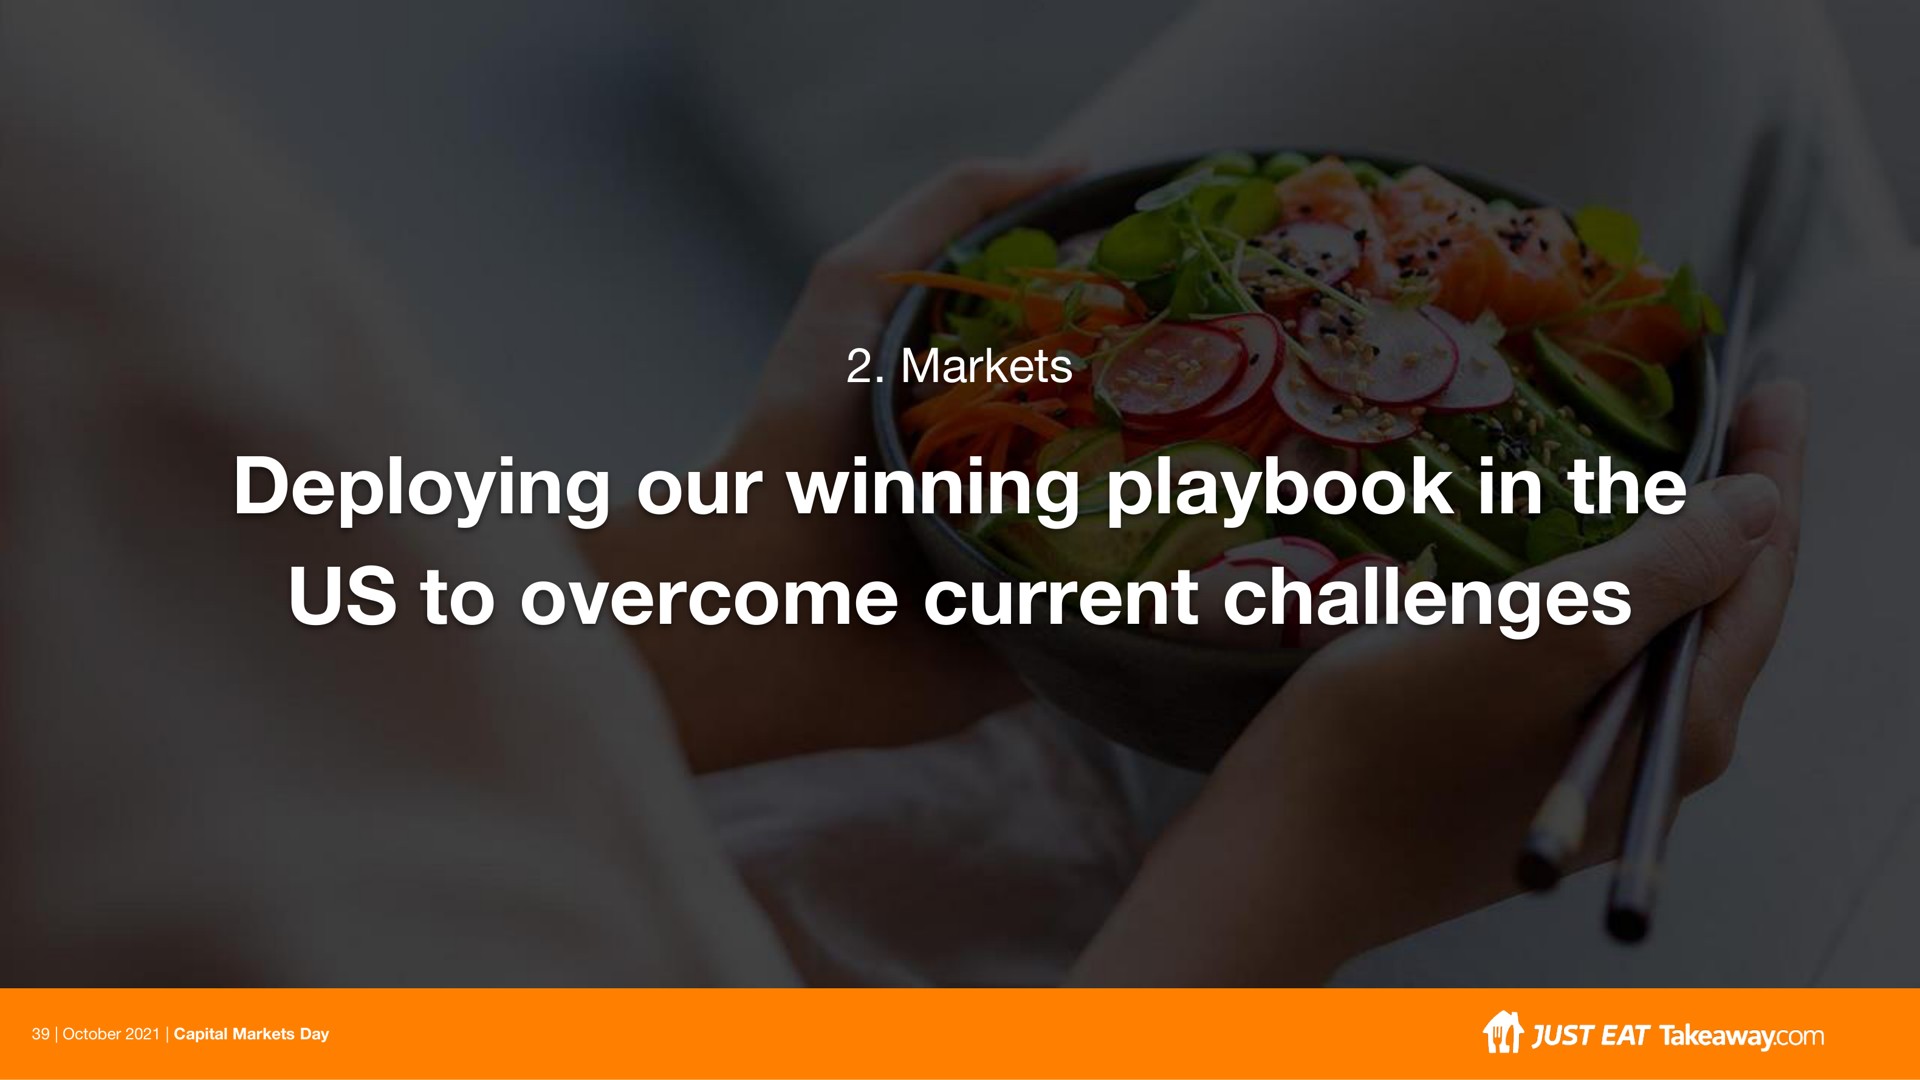 markets deploying our winning playbook in the us to overcome current challenges | Just Eat Takeaway.com